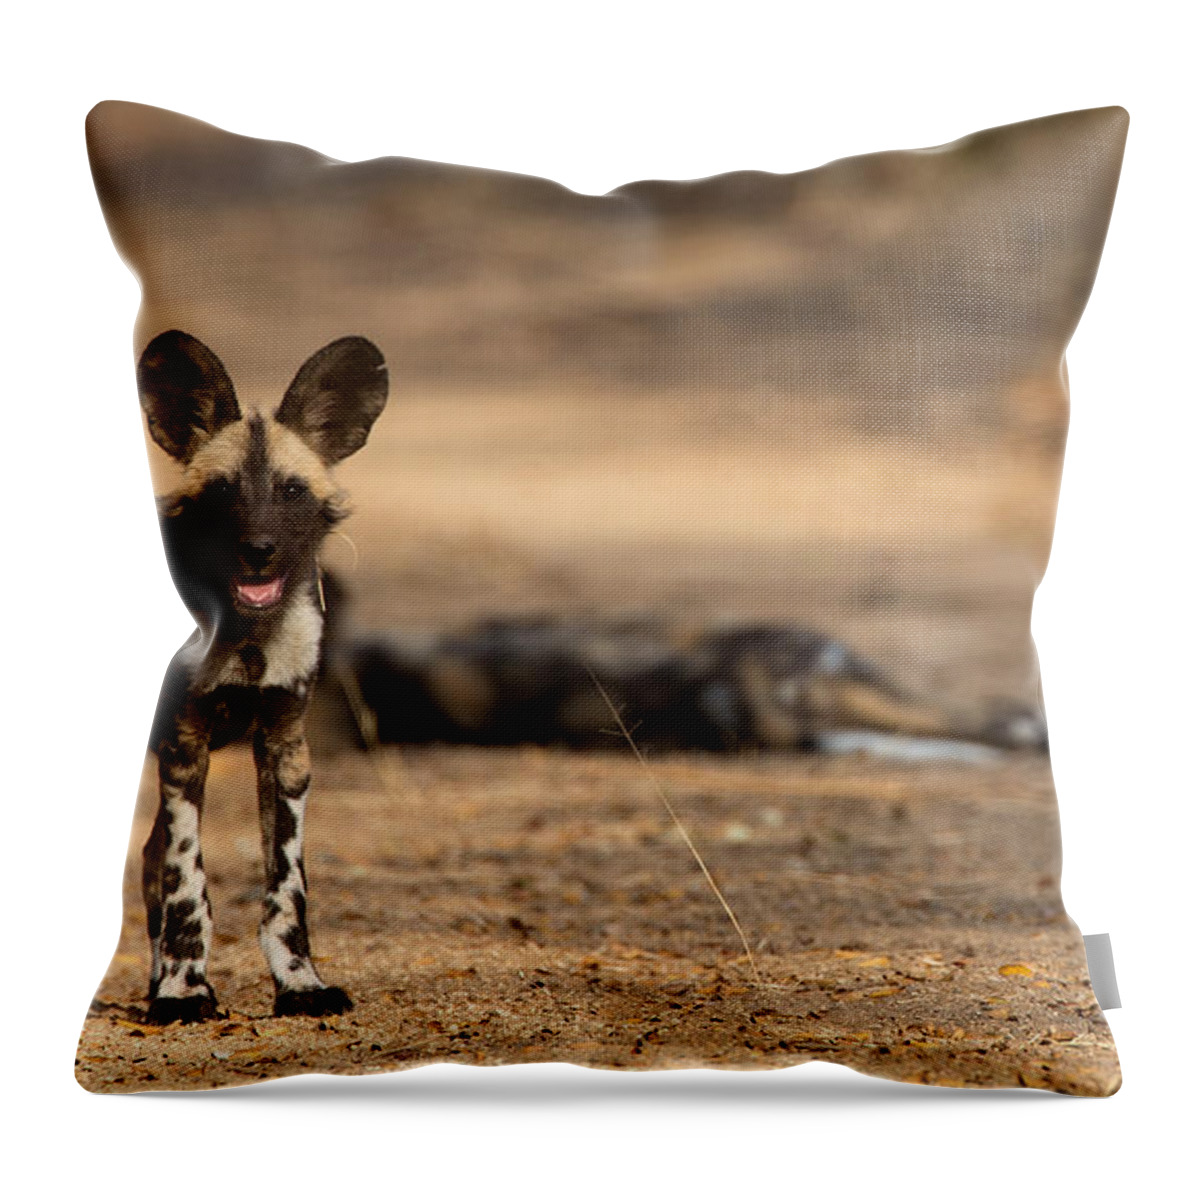 African Wild Dog Throw Pillow featuring the photograph Wild Dog Puppy by Max Waugh